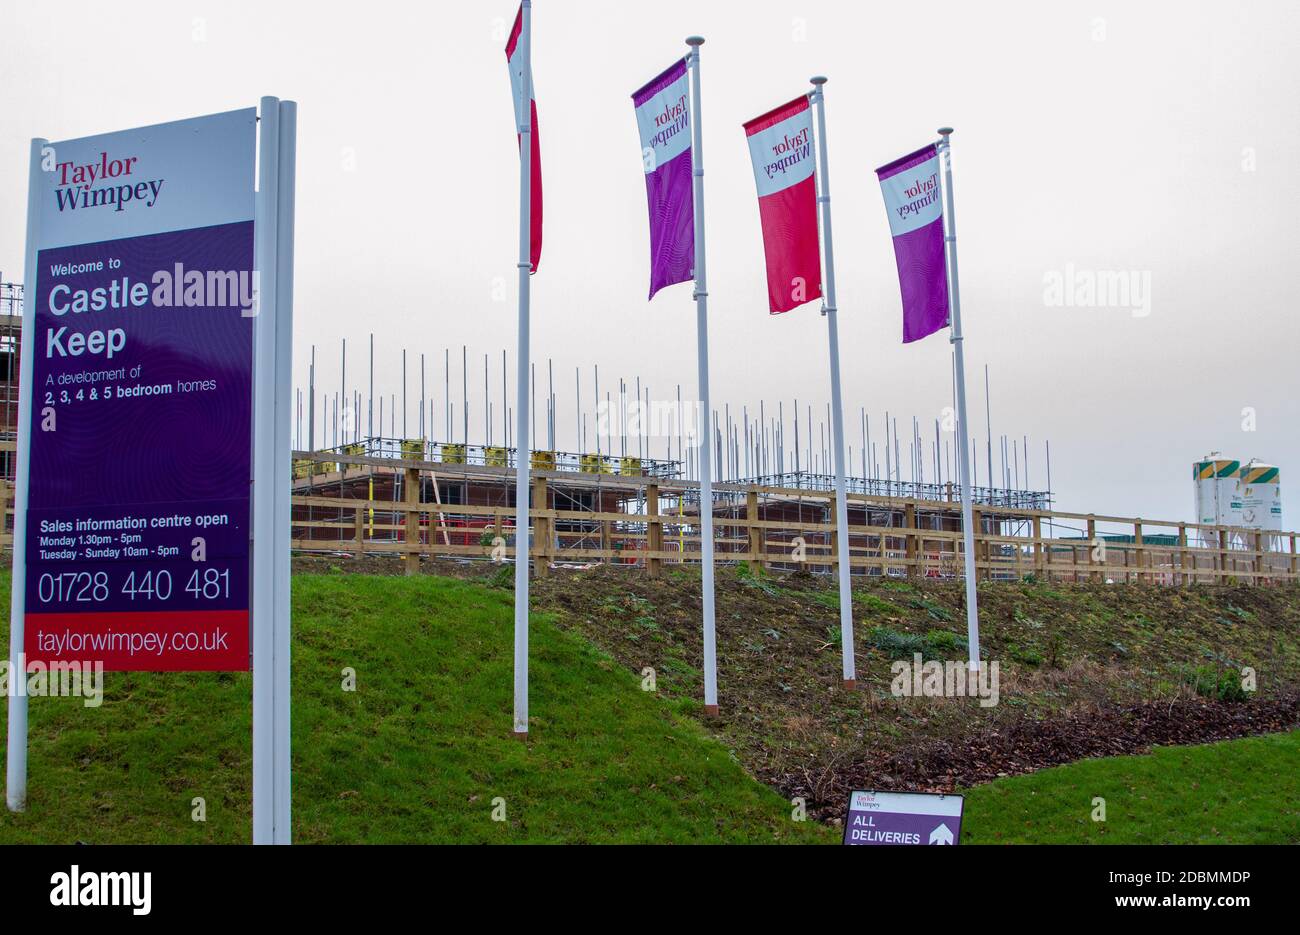 Flags by a Wimpey Taylor housing development in Framlingham Suffolk Stock Photo